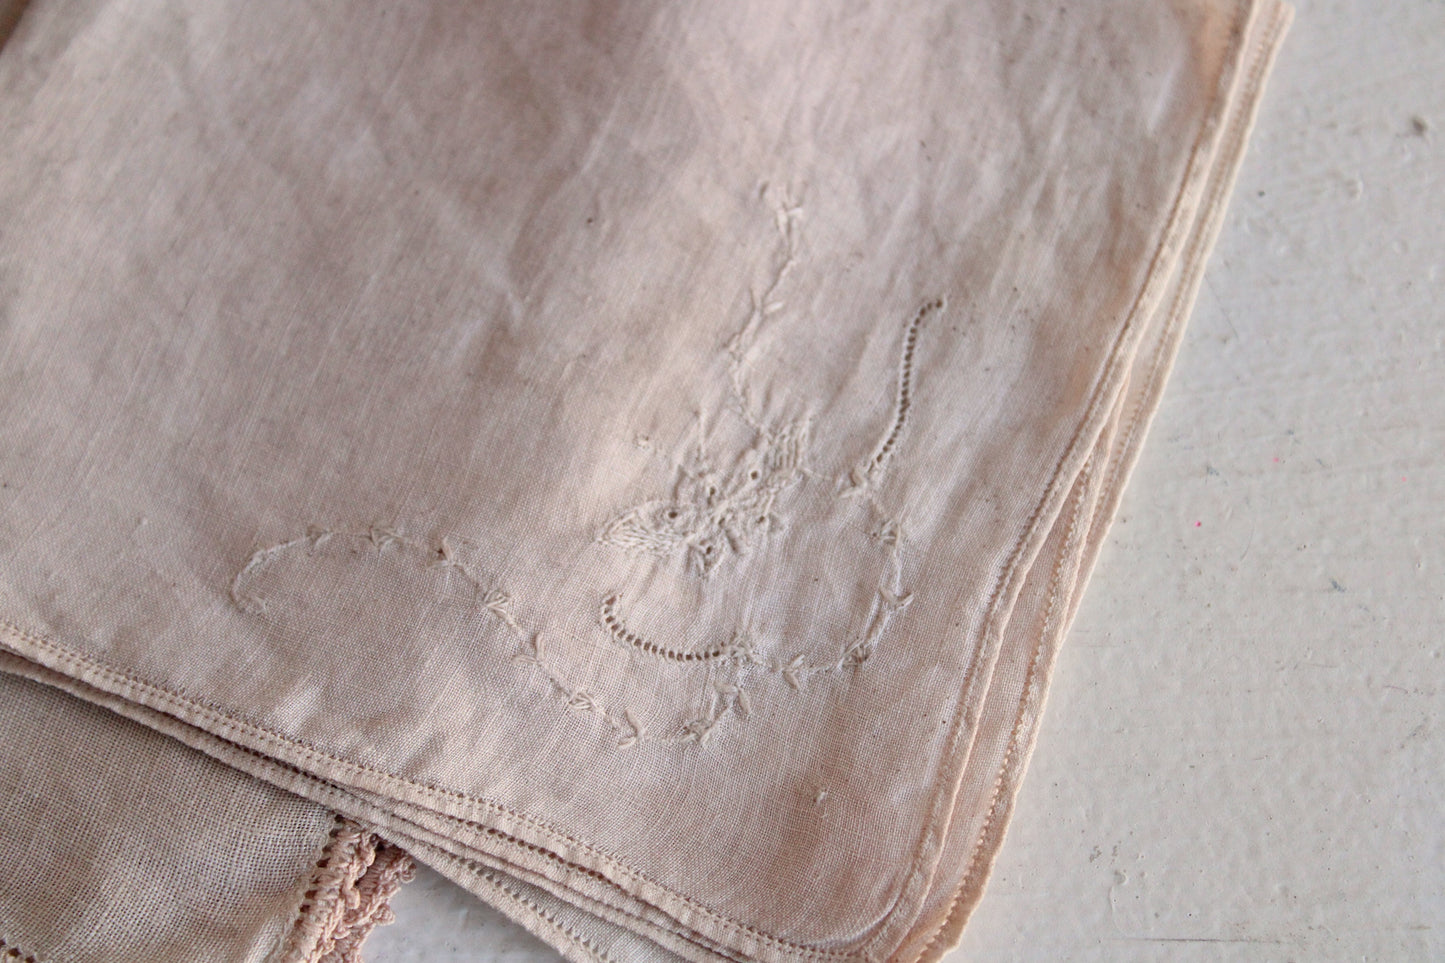 "Moth Wing" Hand Plant Dyed Vintage Handkerchief in Mottled Dusty Pink